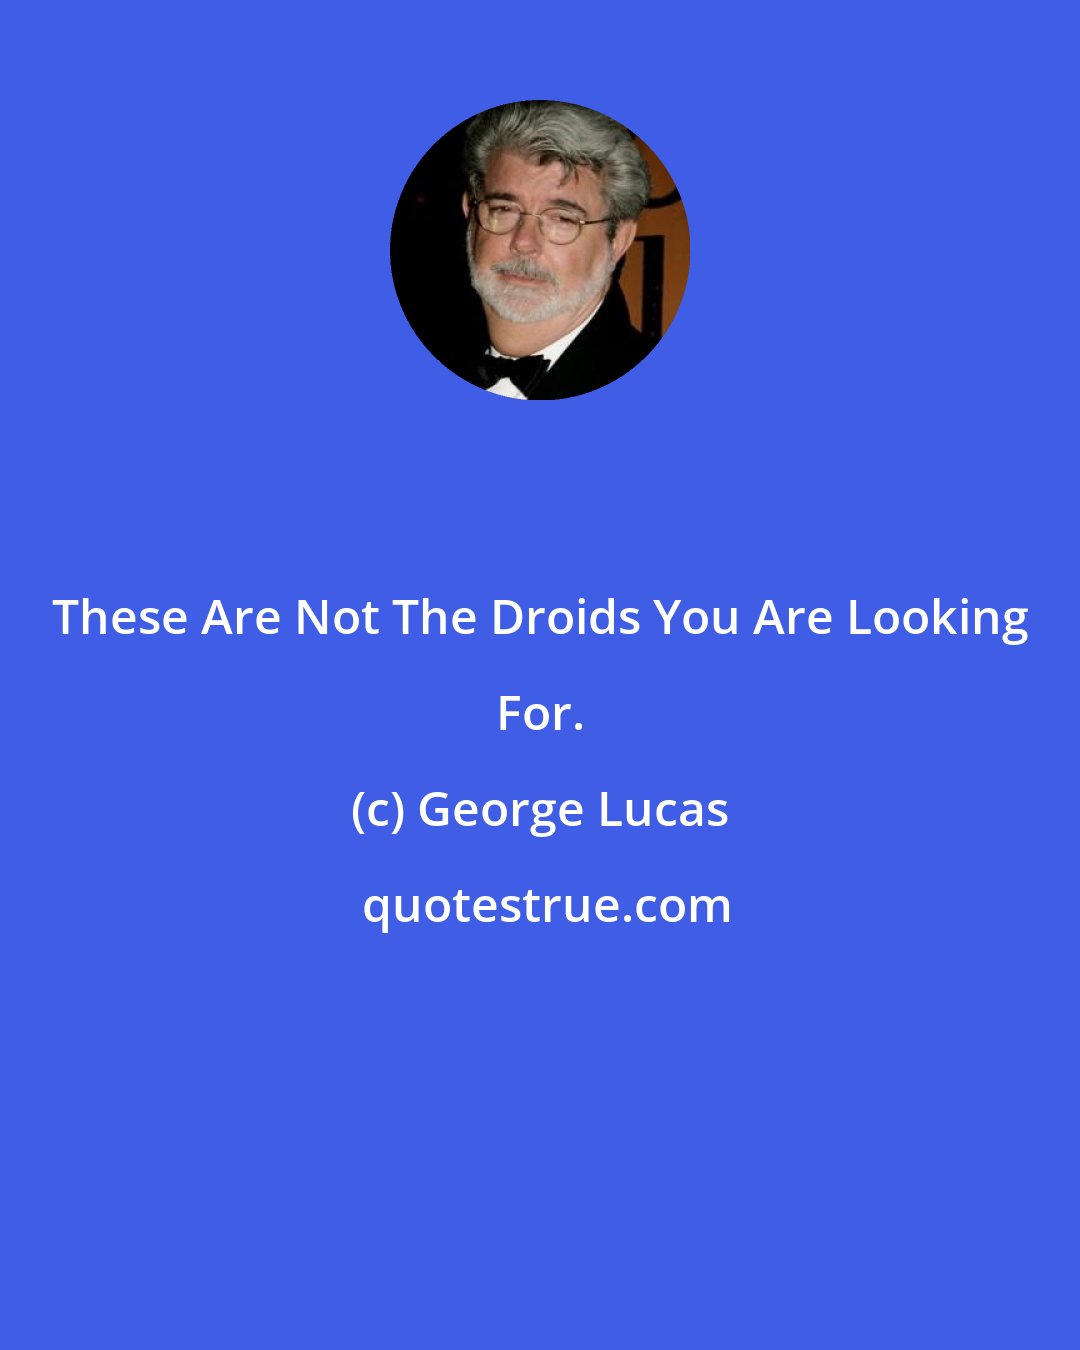 George Lucas: These Are Not The Droids You Are Looking For.